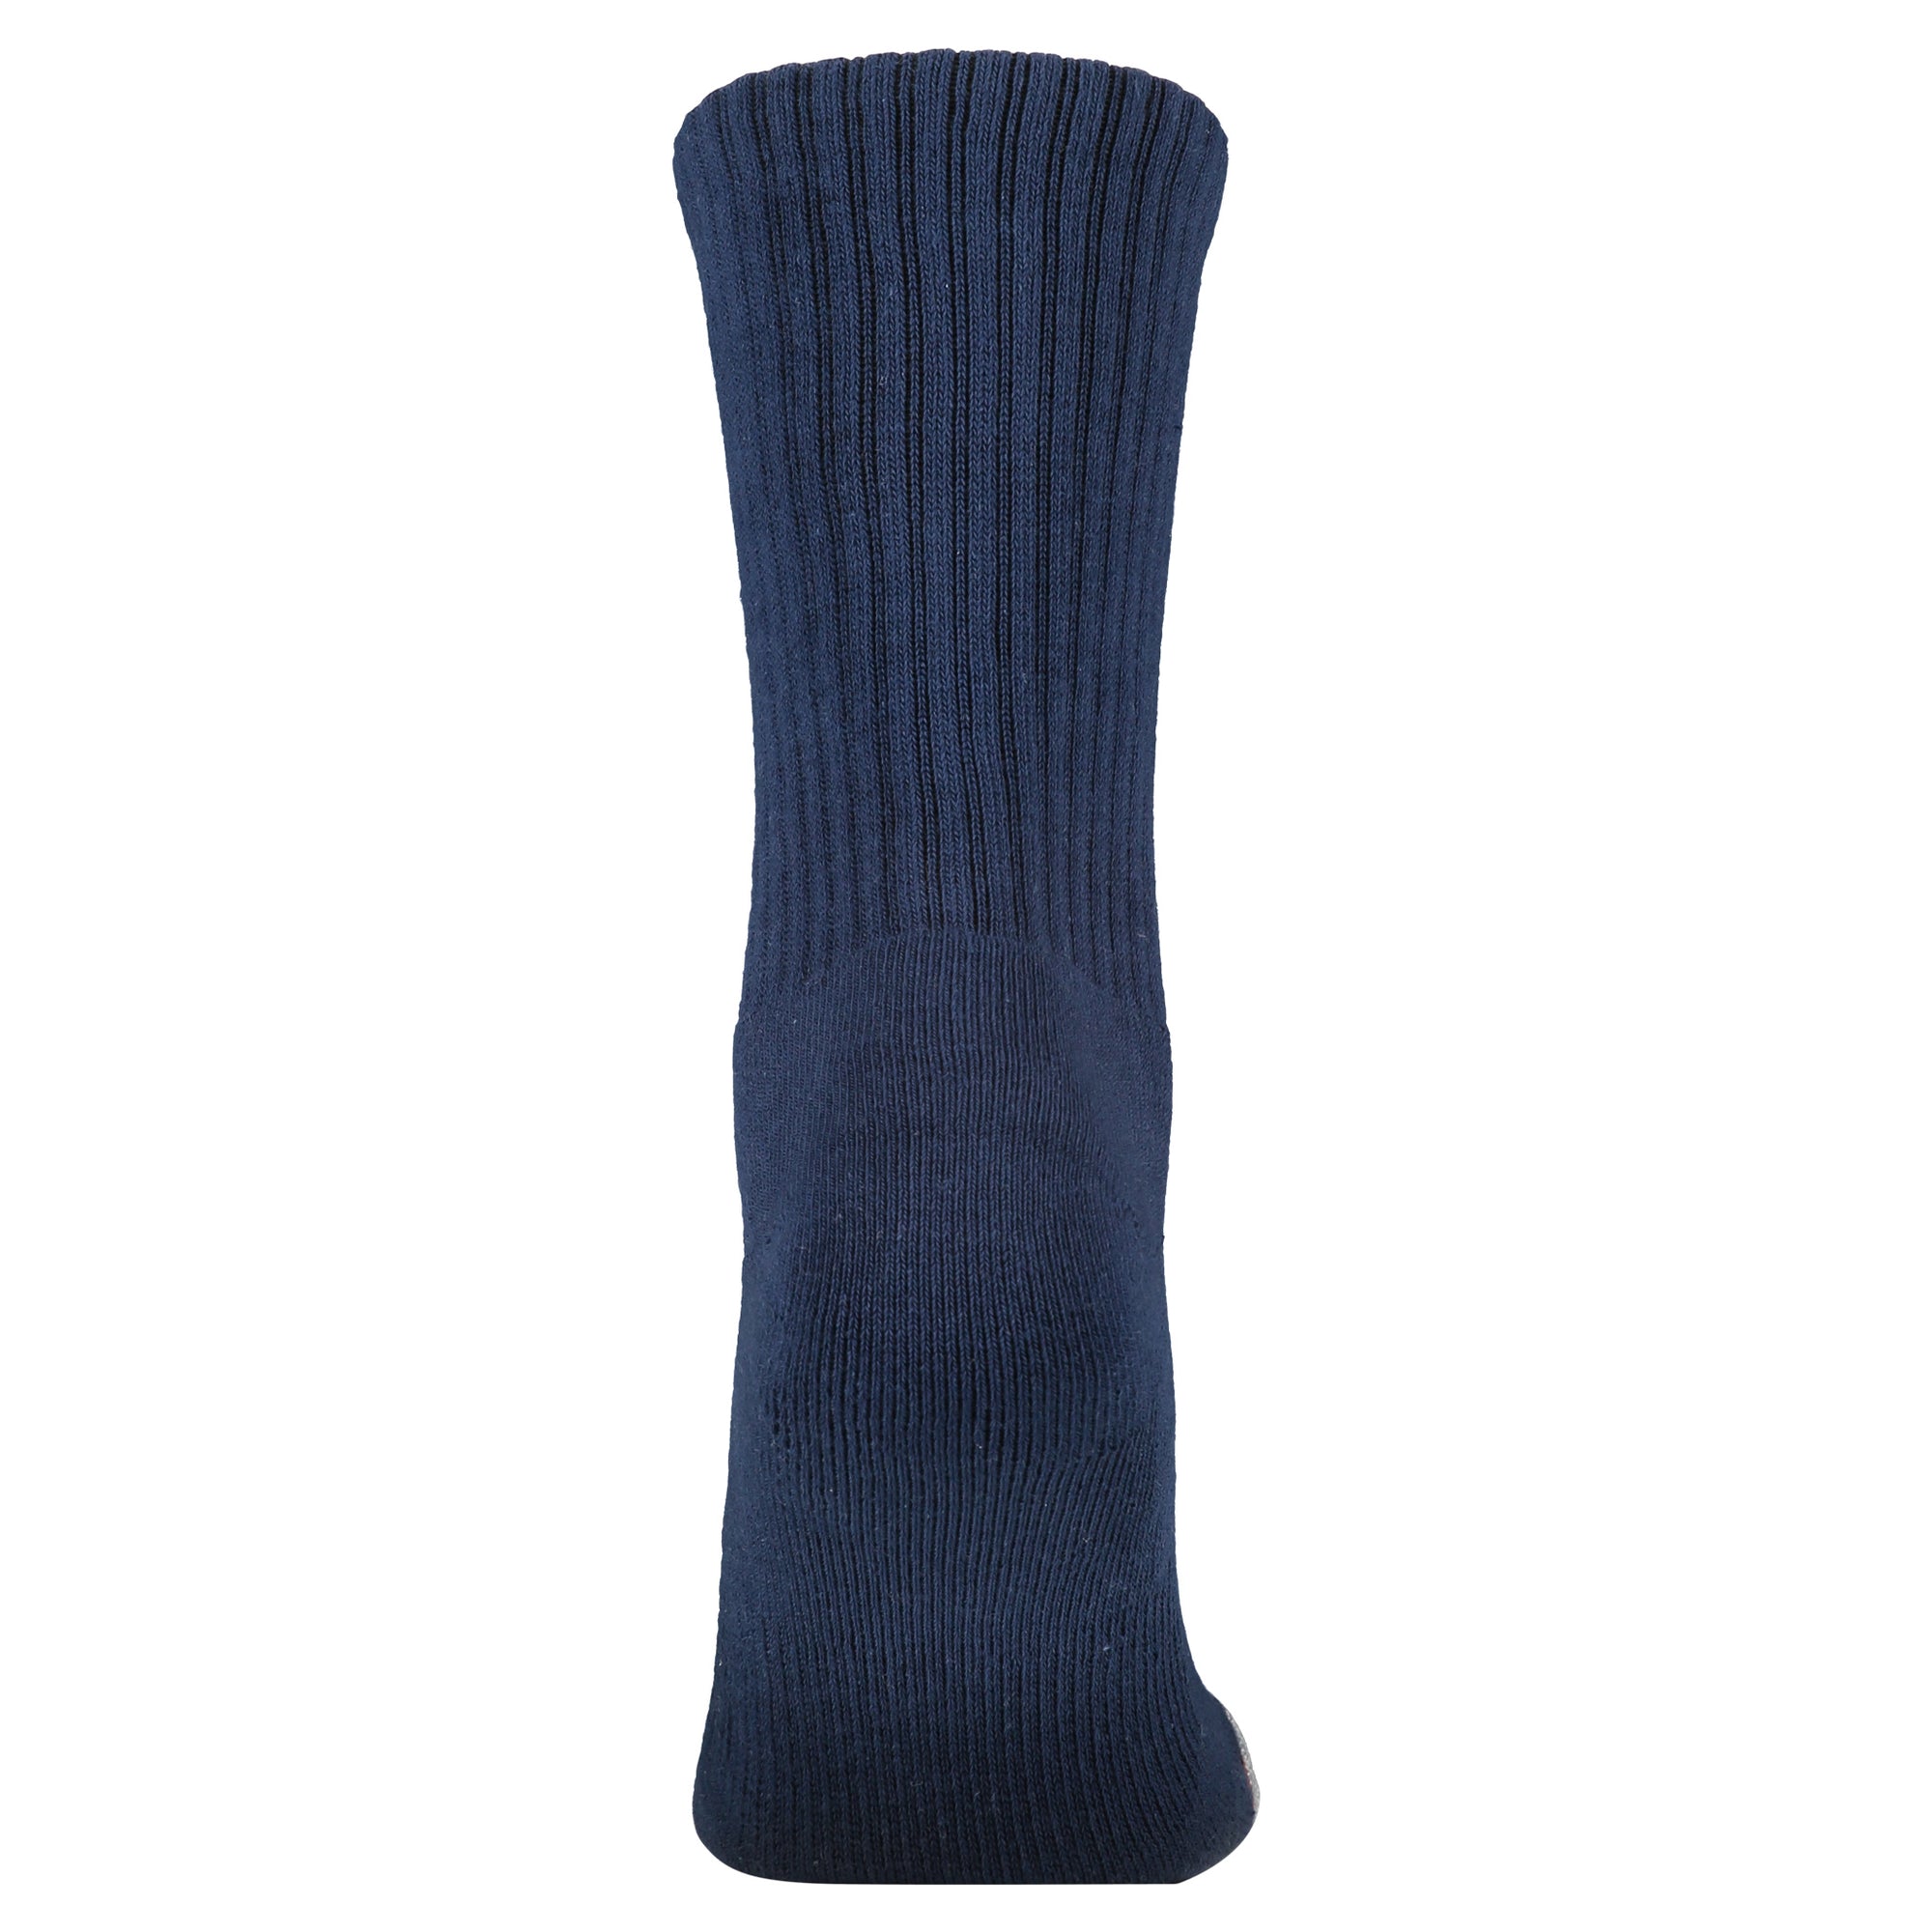 Crossfly men's Original Crew Socks in navy from the Everyday series, featuring Flat Toe Seams and 360 Hold.